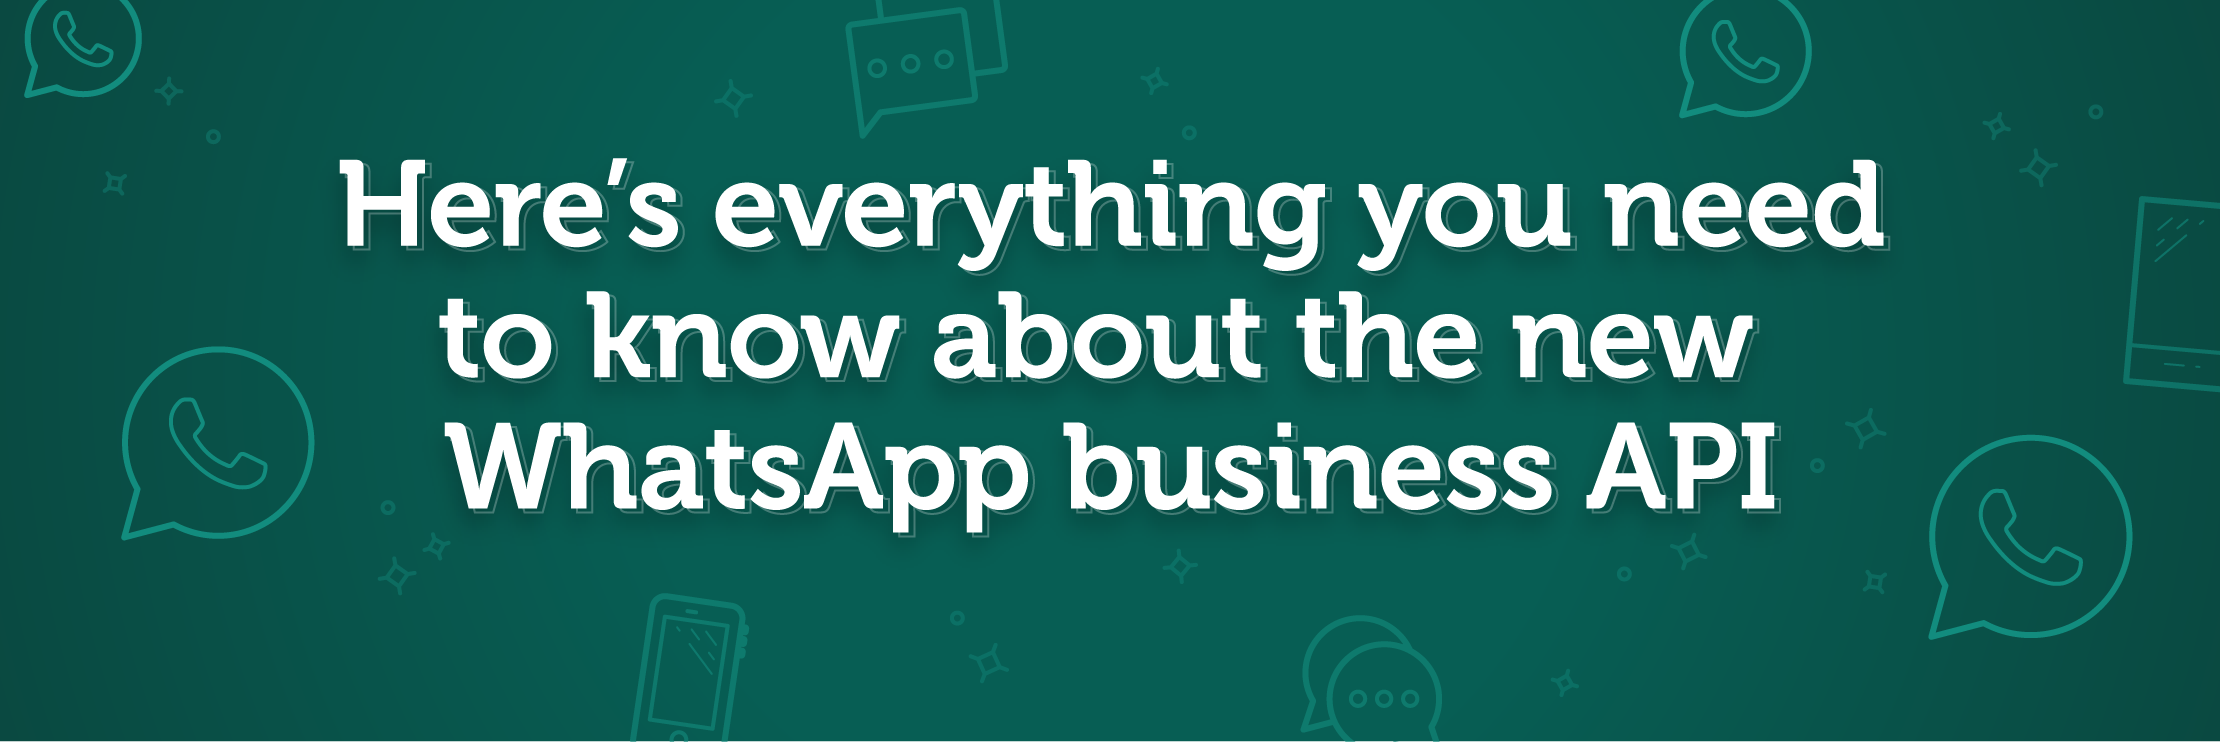 A banner that says here's everything you need to know about the new WhatsApp business API